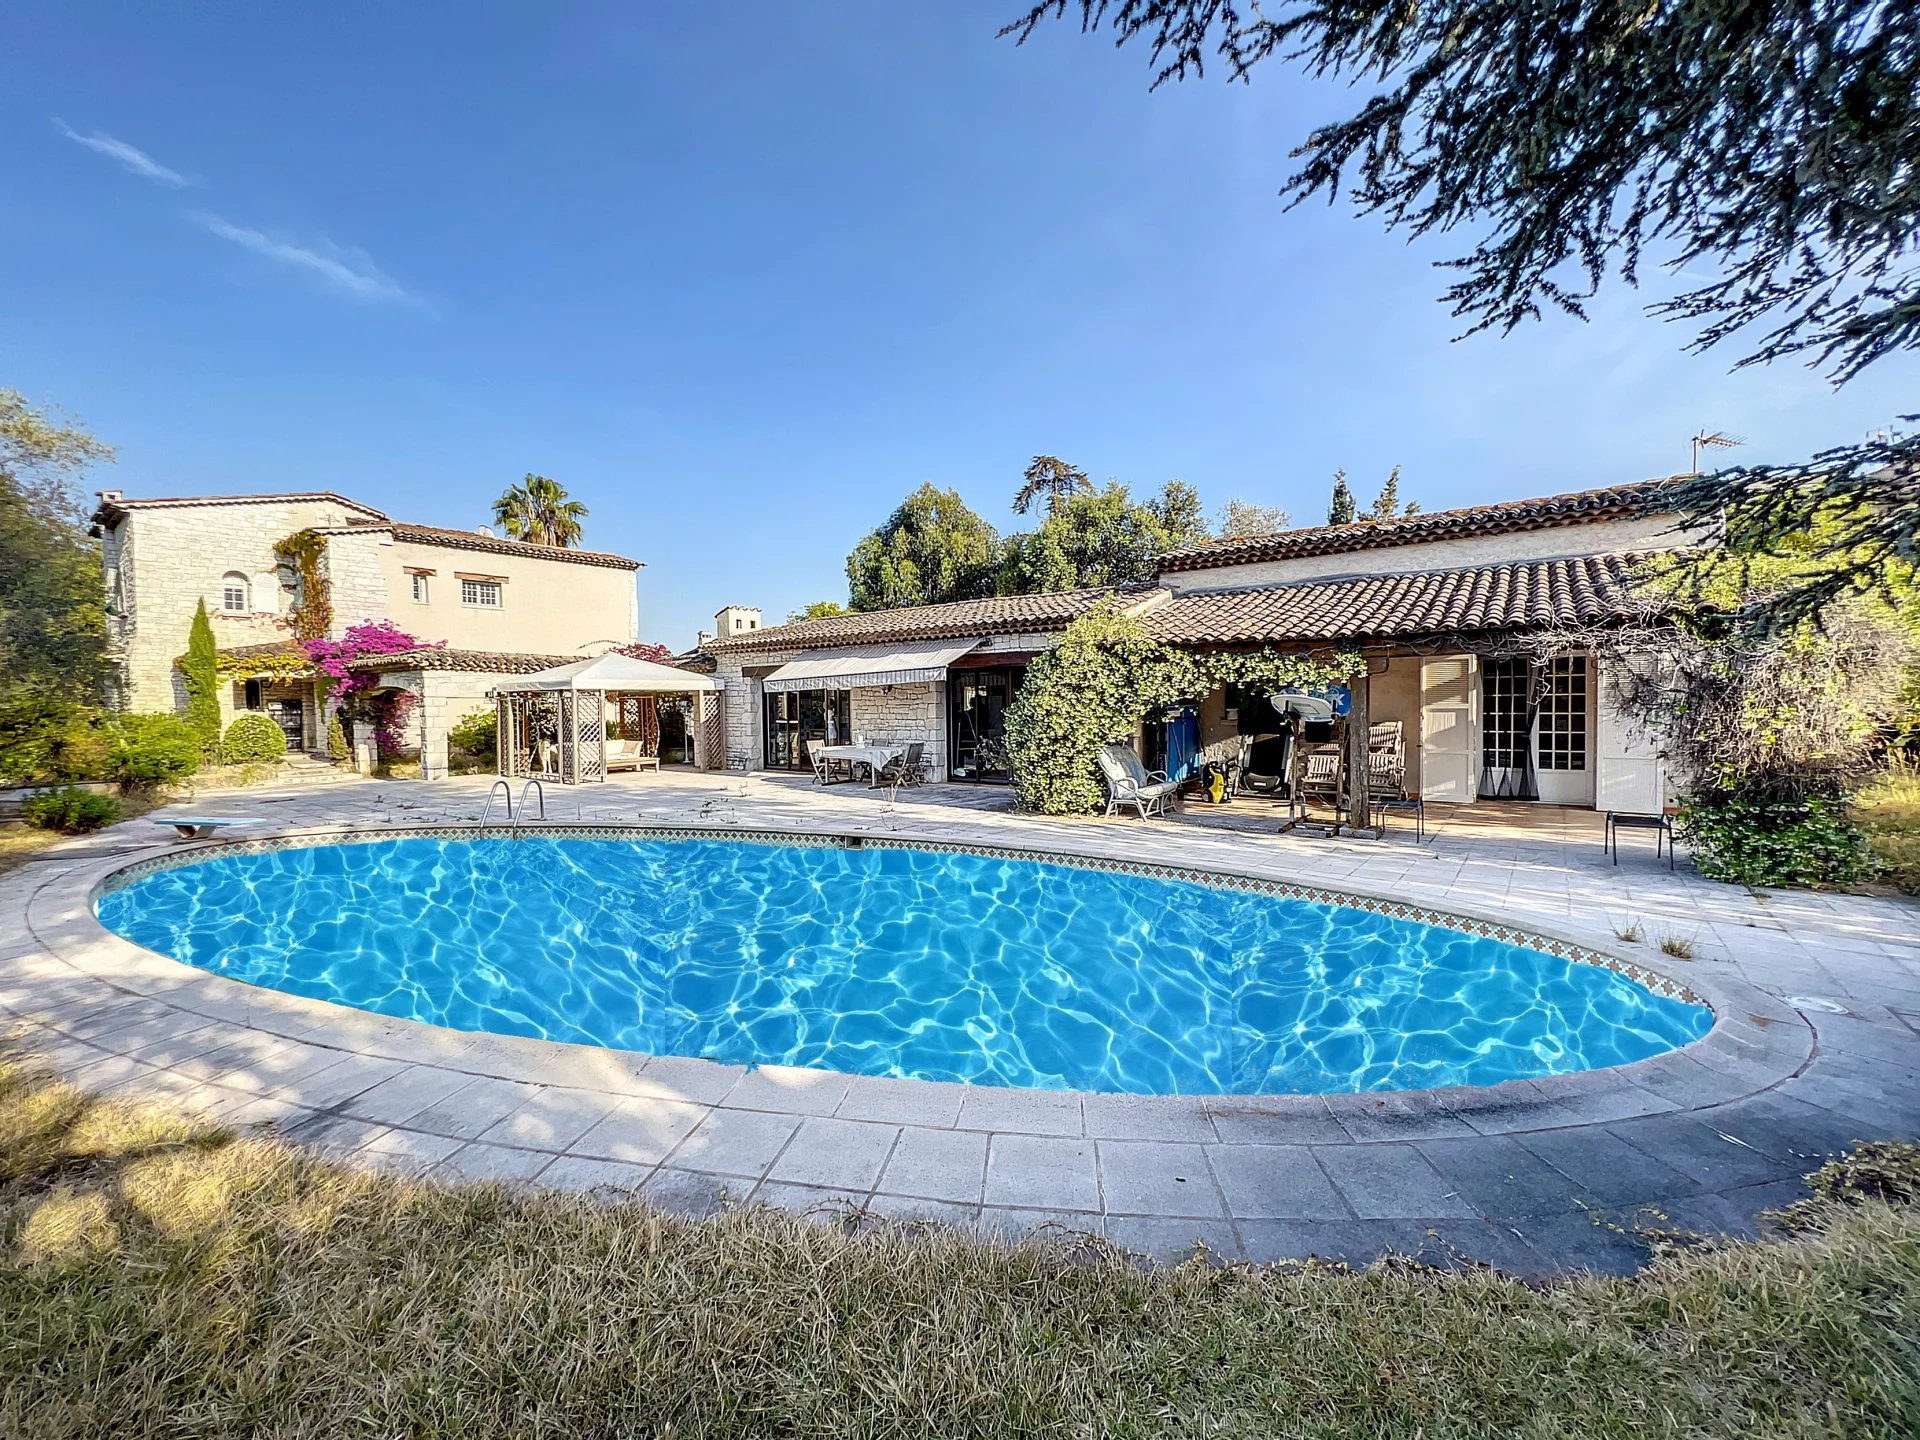 Villa with pool in Antibes